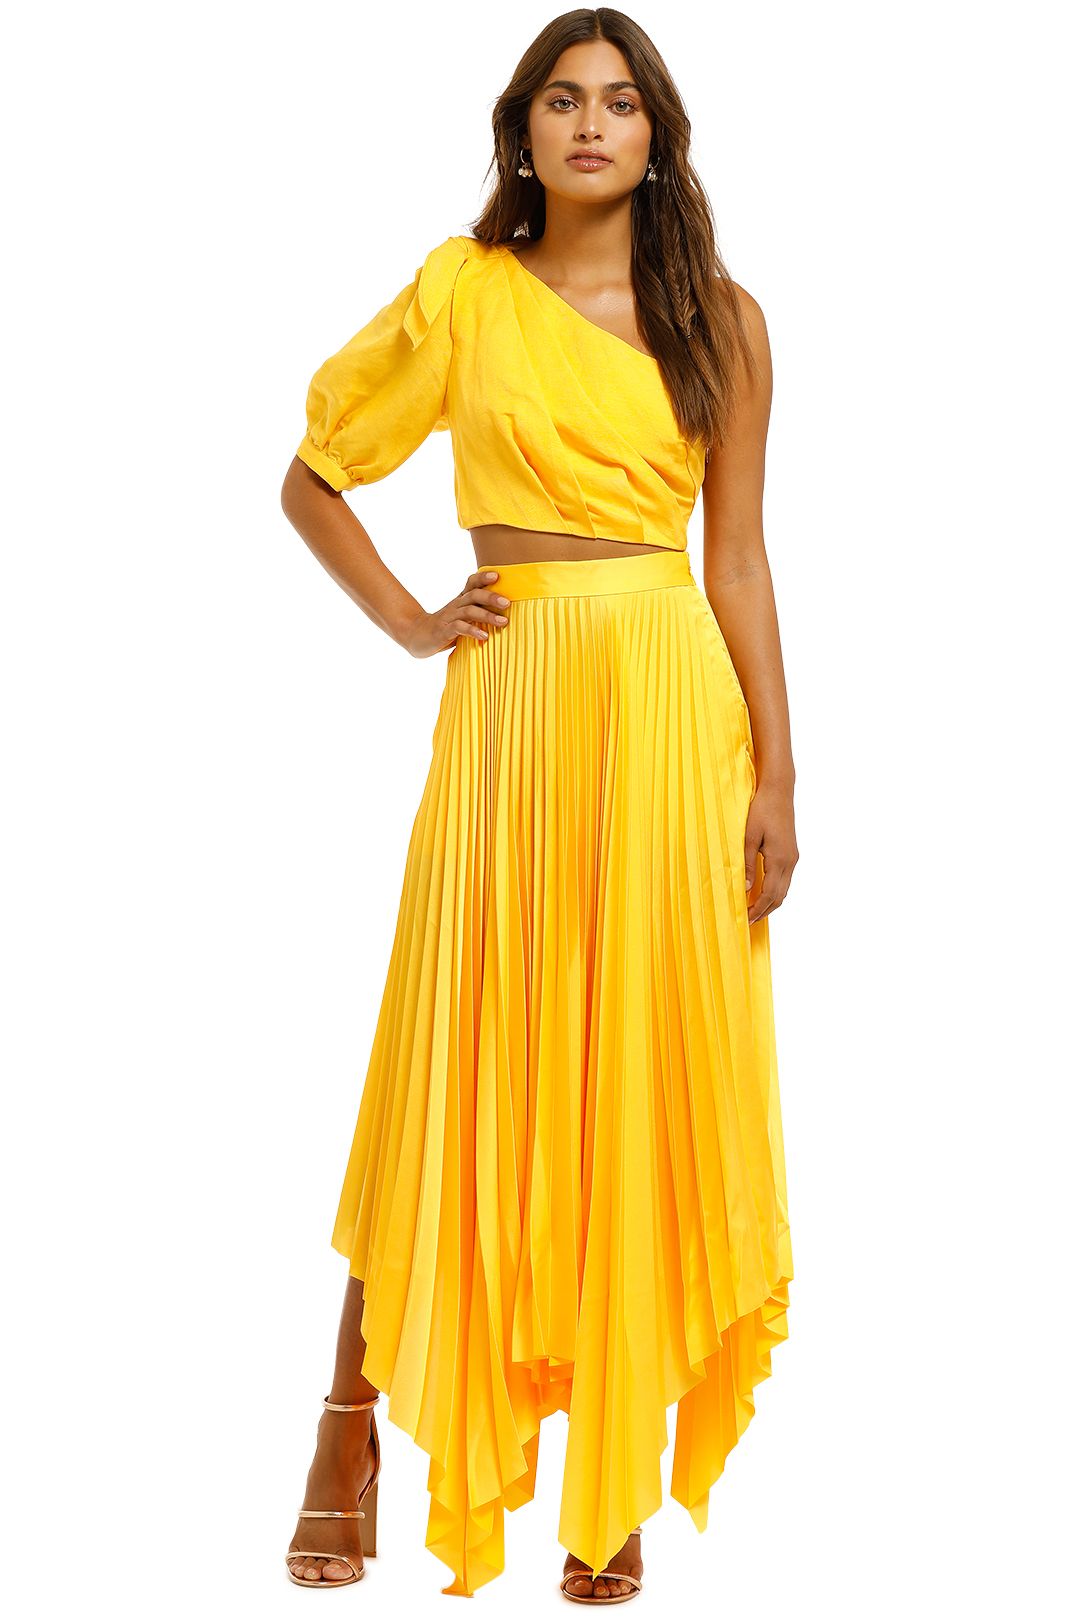 Eden Skirt in Marigold by Significant Other for Rent | GlamCorner